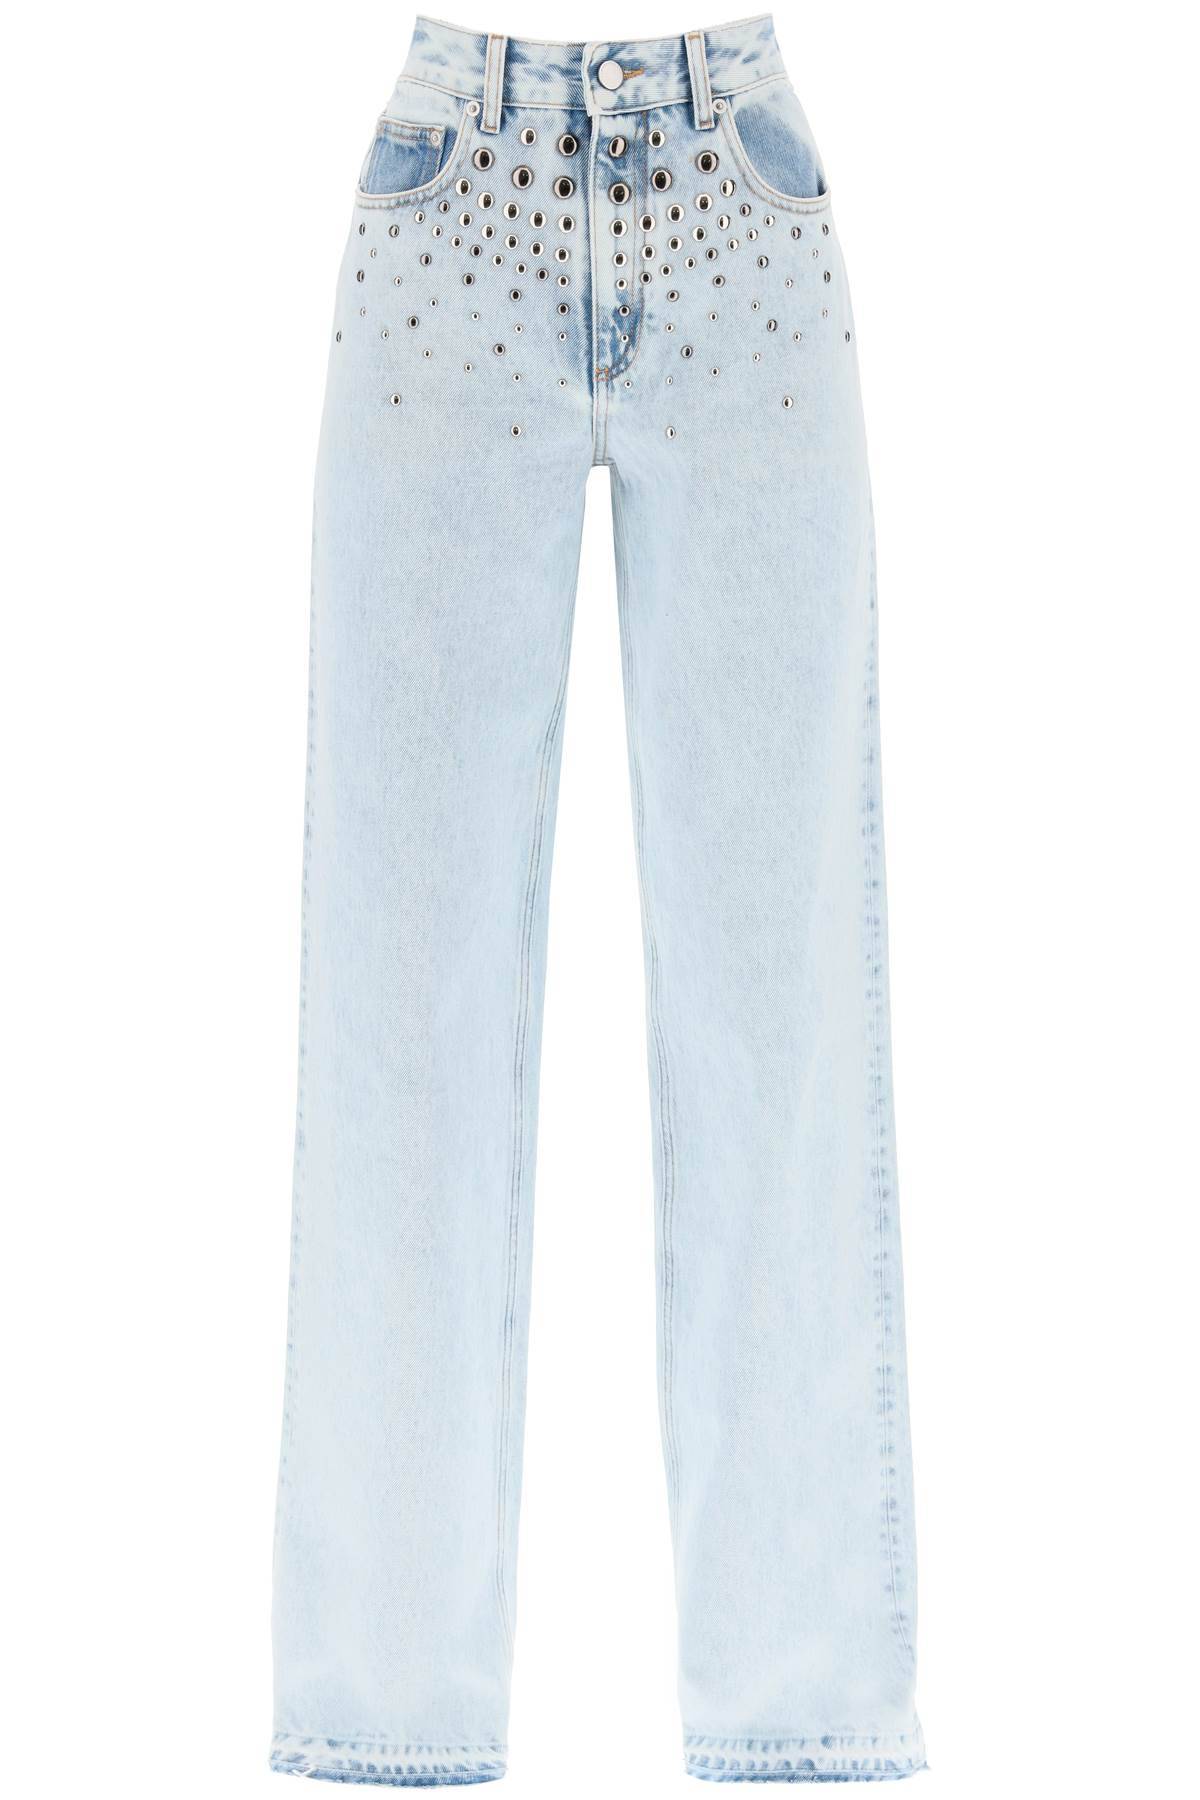 Alessandra Rich ALESSANDRA RICH jeans with studs